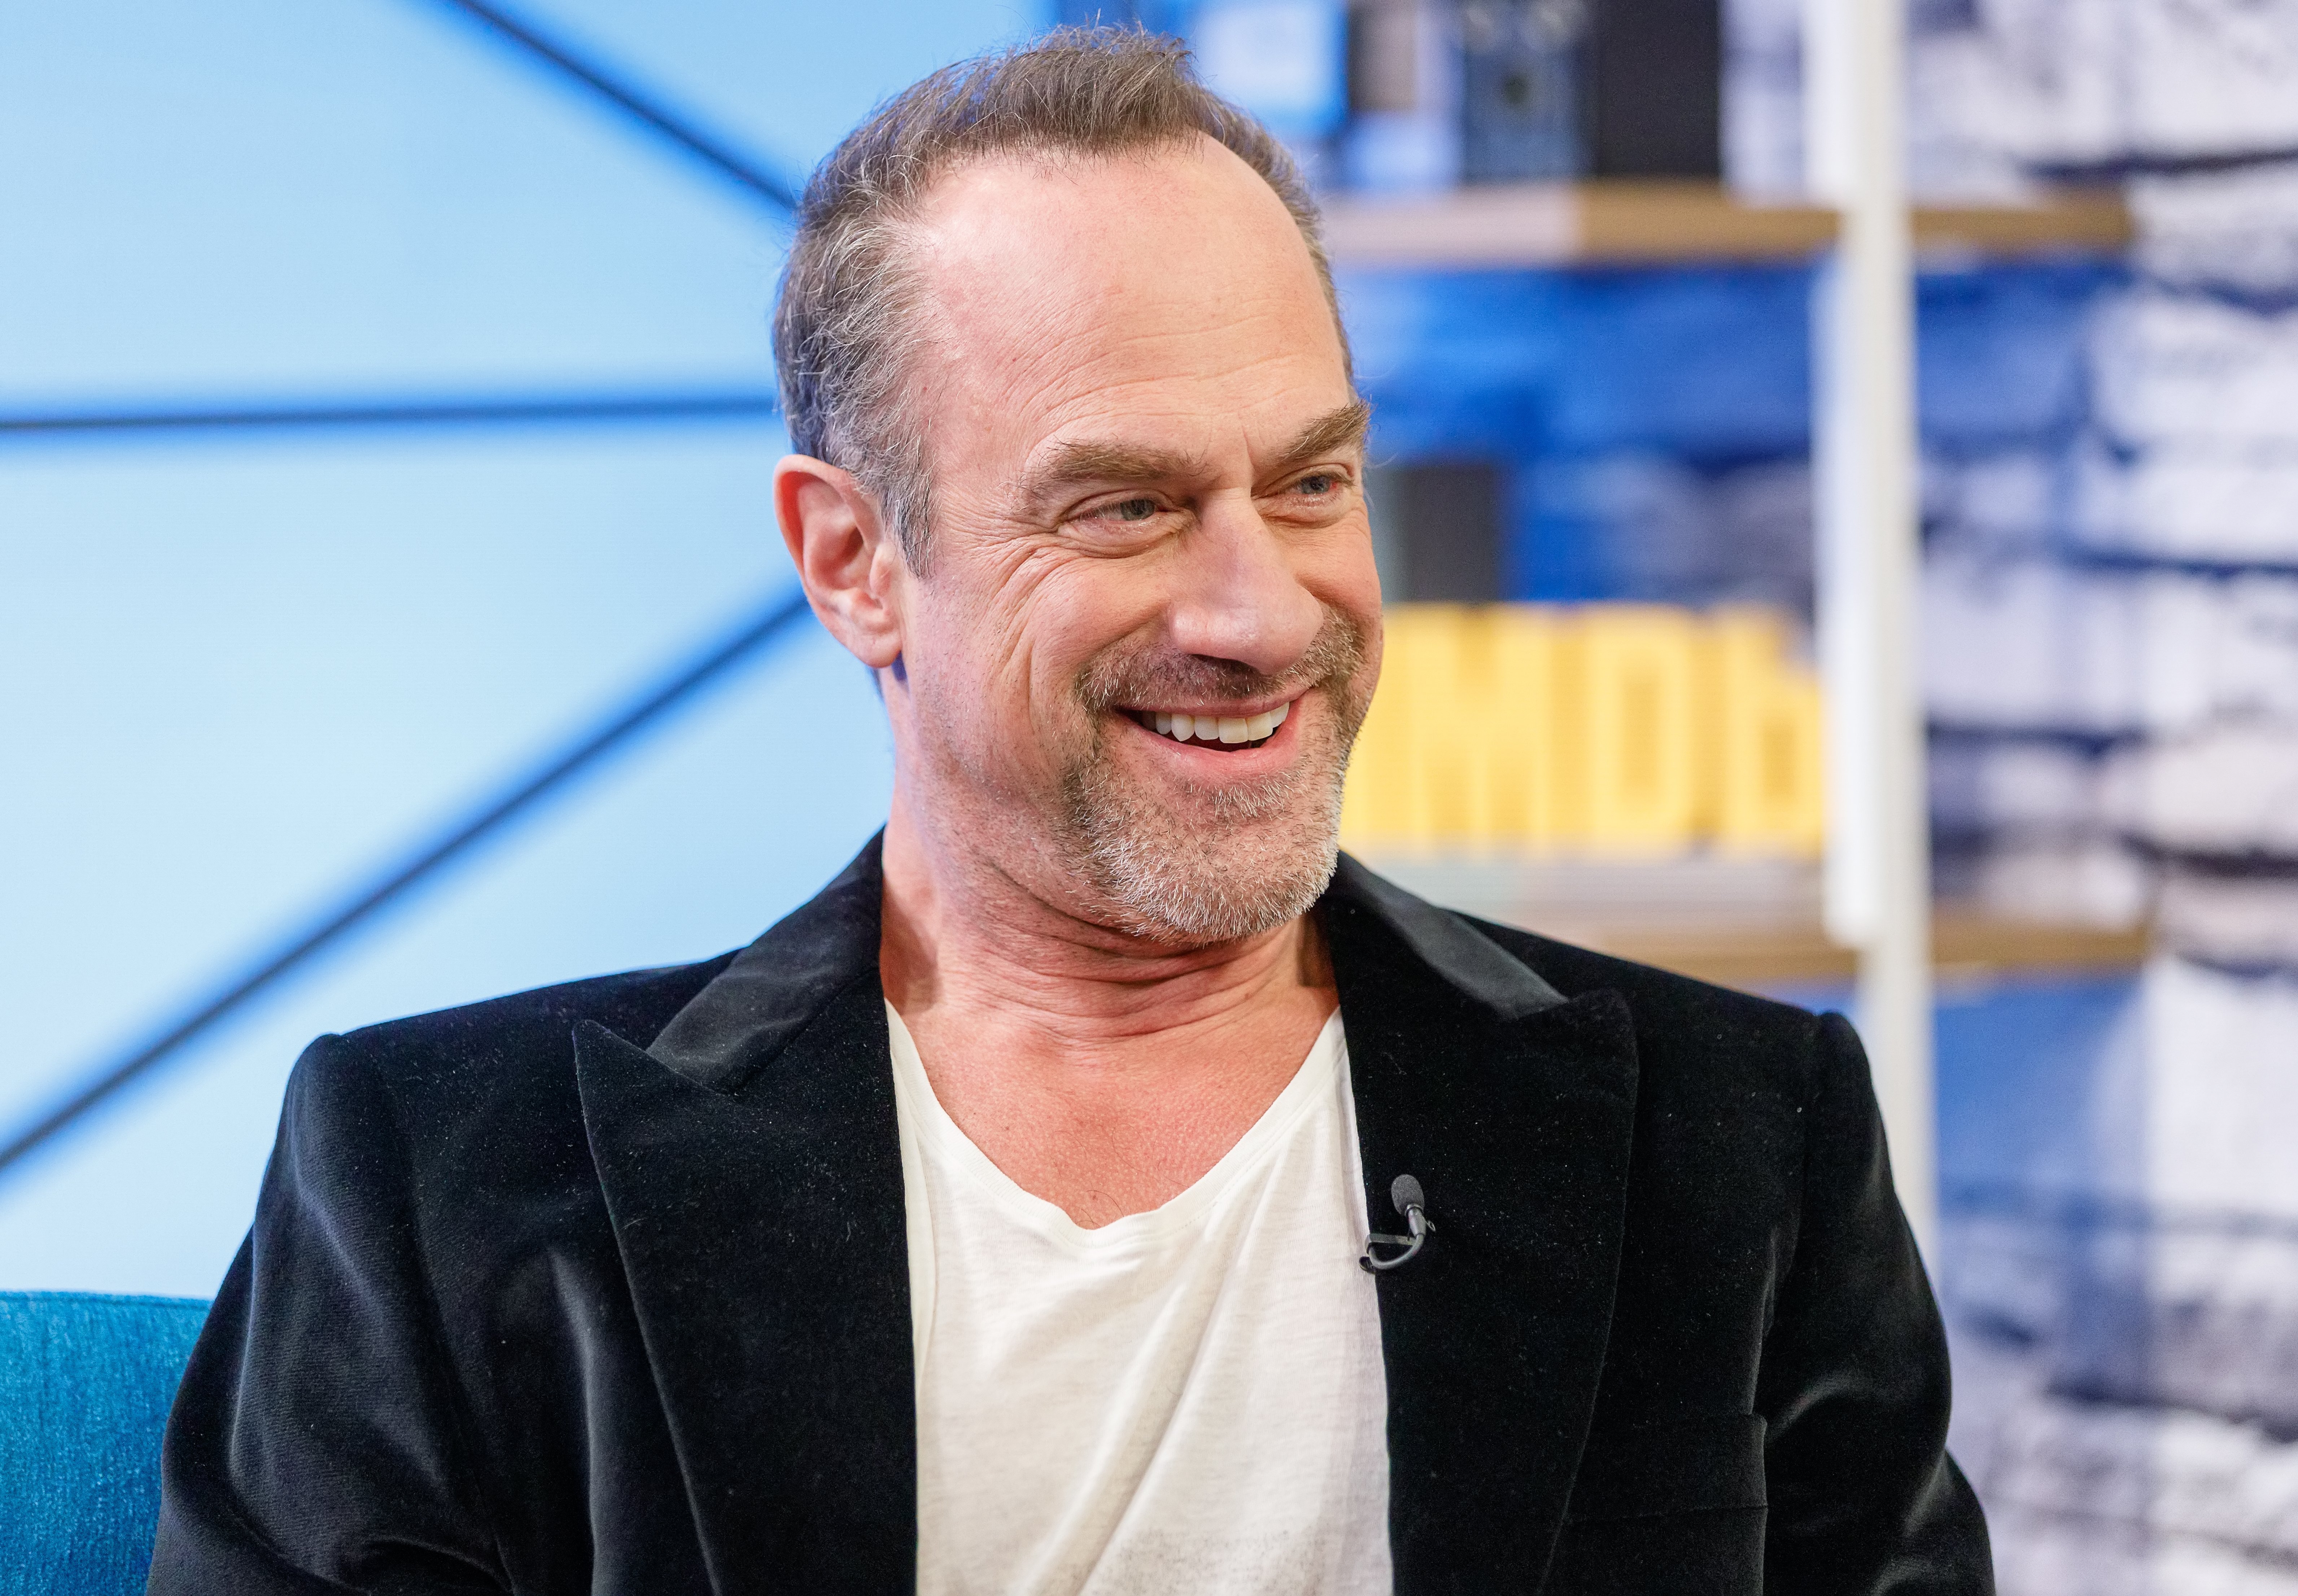 Christopher Meloni visits 'The IMDb Show' on March 26, 2019 in Studio City, California. | Source: Getty Images.